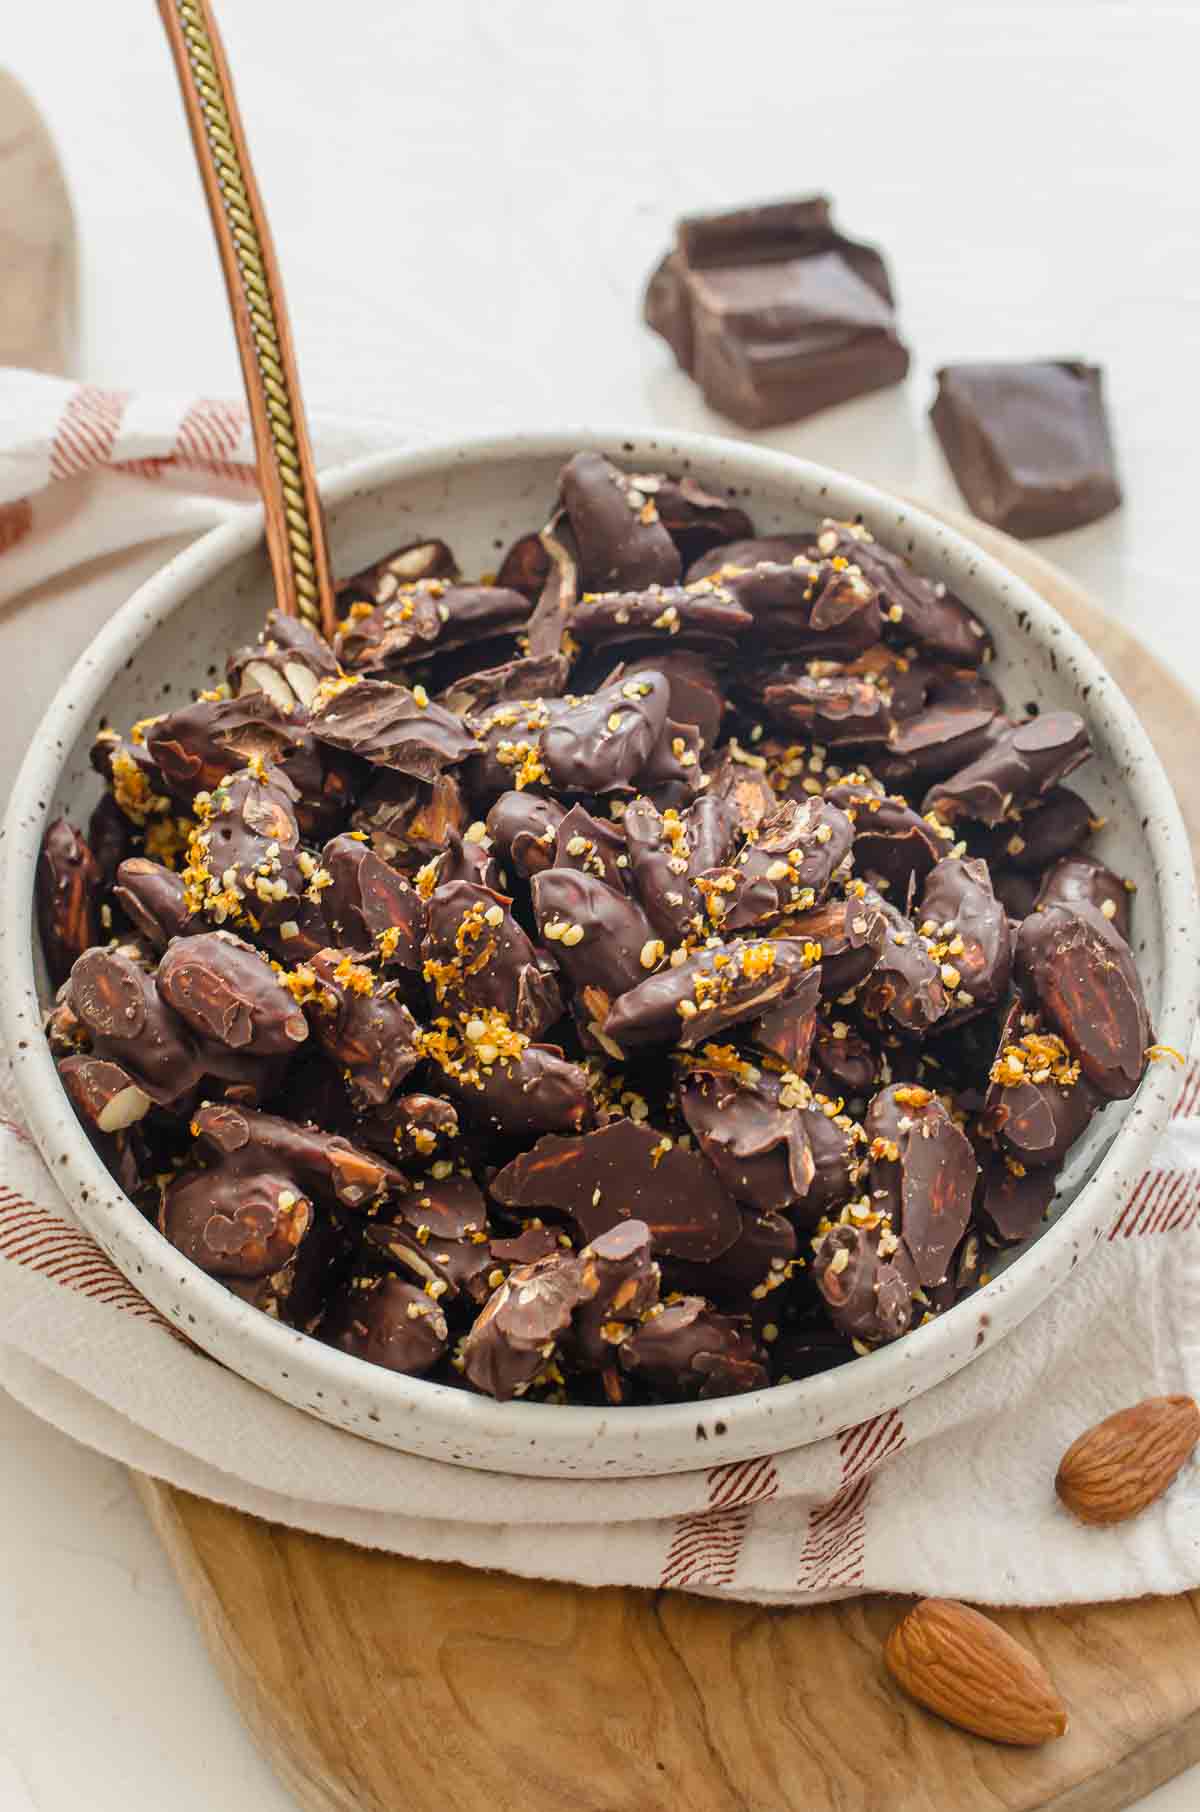 A bowl of chocolate covered almonds.